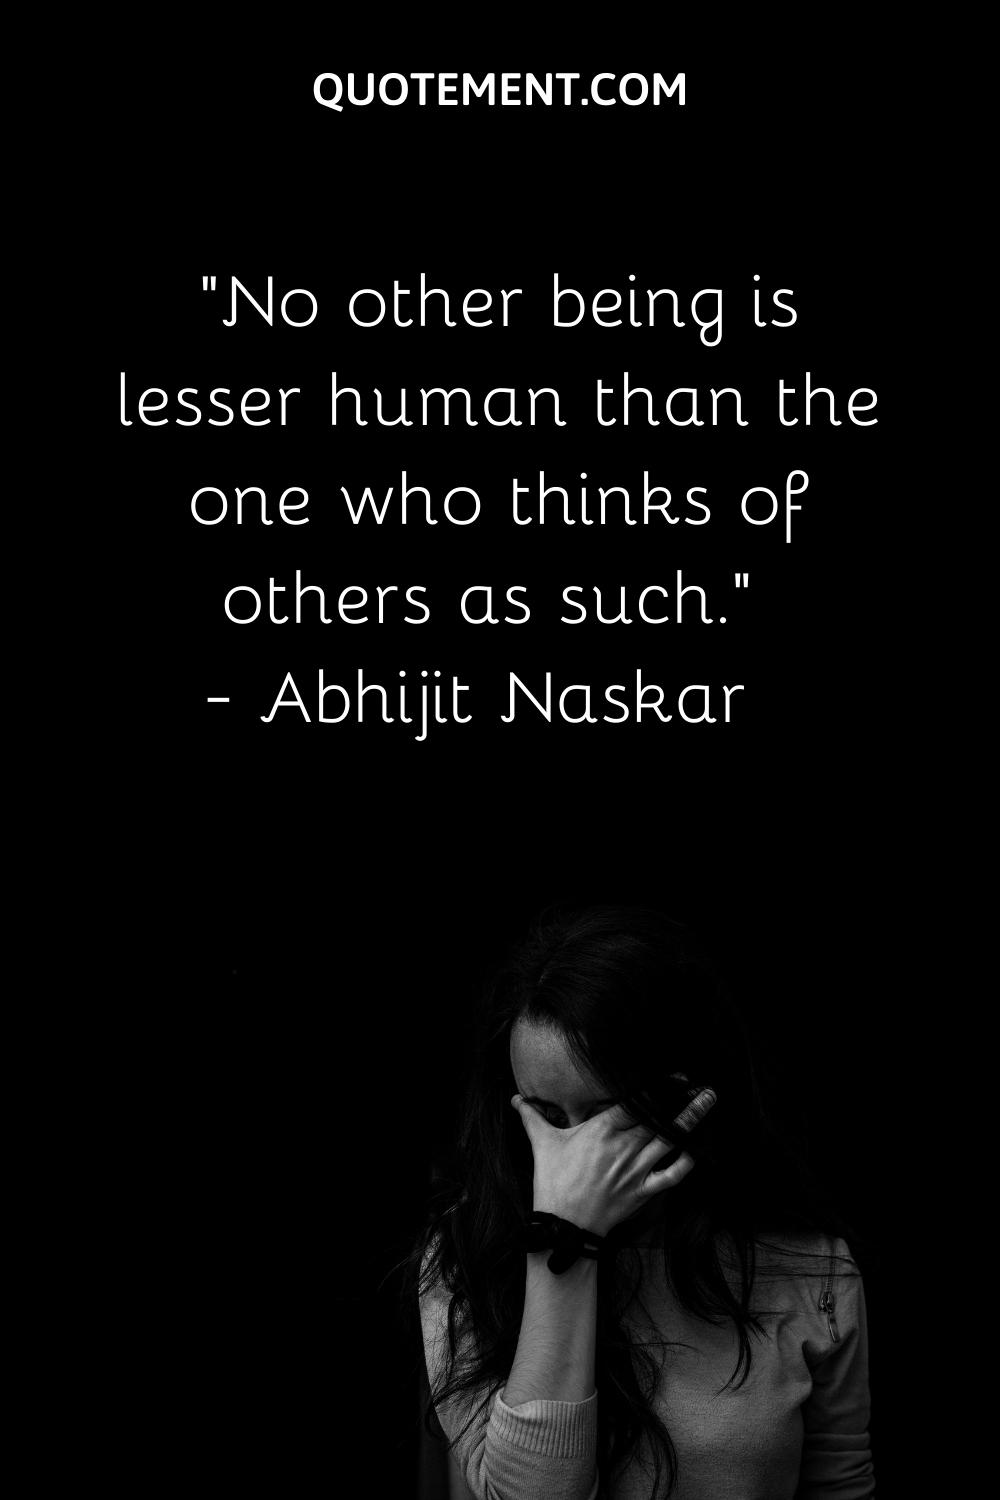 No other being is lesser human than the one who thinks of others as such